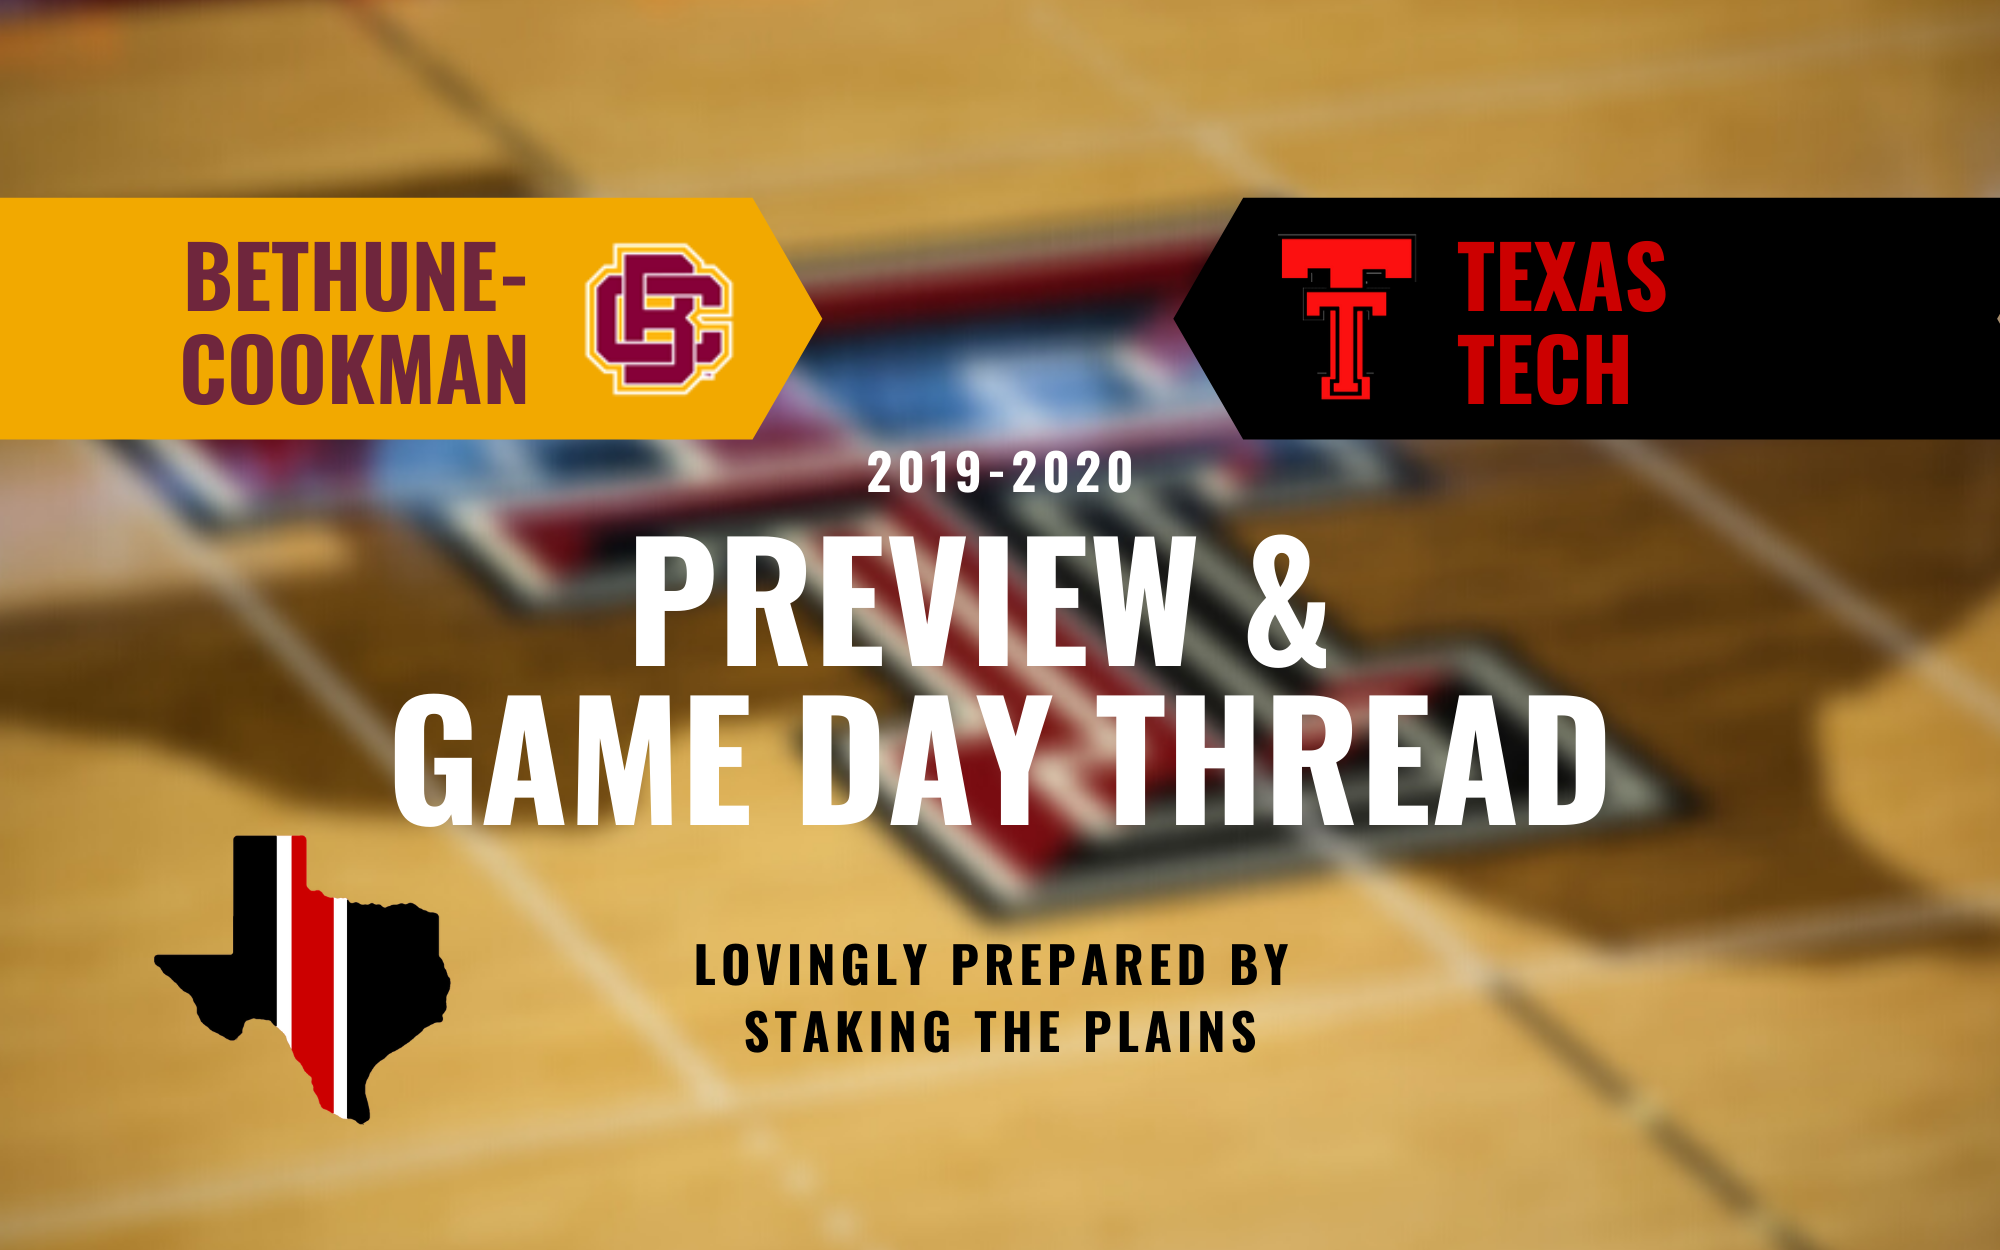 Preview & GDT: Bethune-Cookman vs. Texas Tech